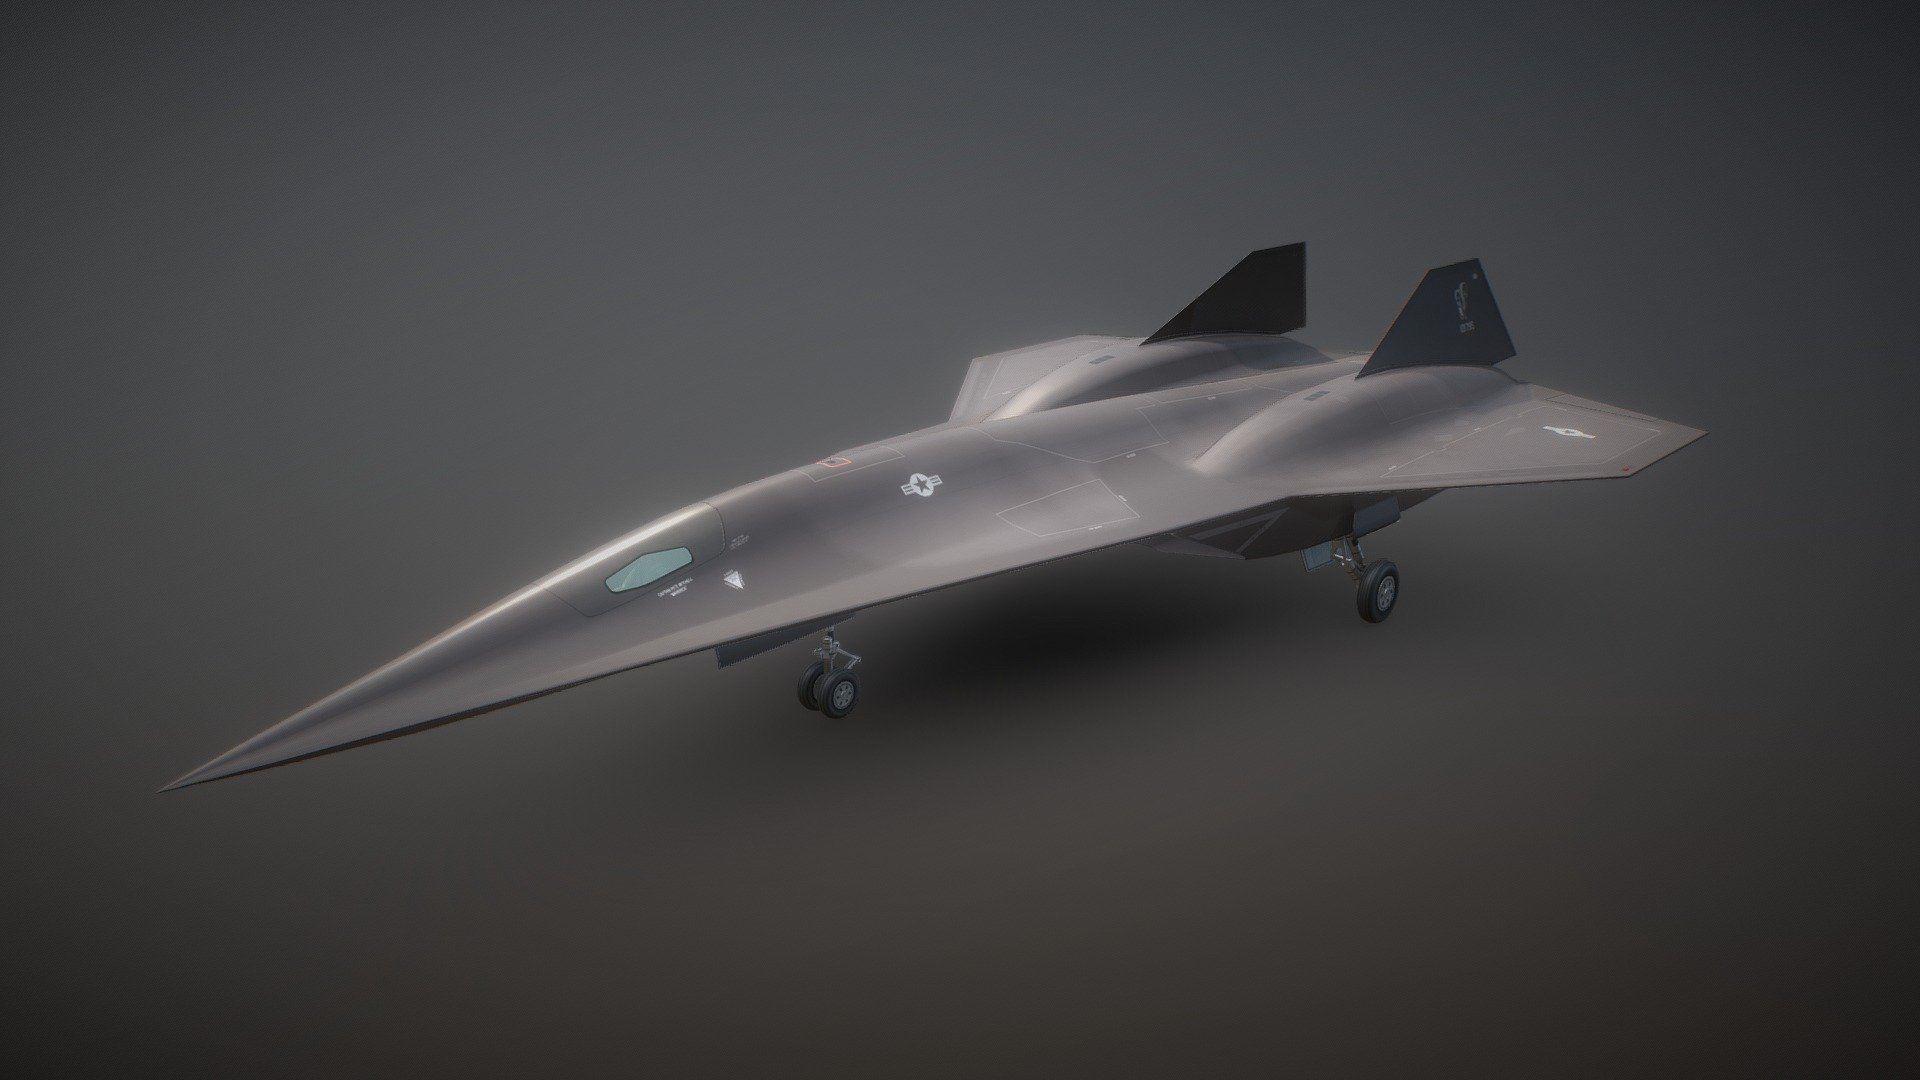 The Lockheed Martin's stealthy SR-72 Darkstar, a hypersonic jet intended to provide superior air reconnaissance for the Air Force later this decade or next, colloquially referred to as “Son of Blackbird” is an American hypersonic UAV concept intended for intelligence,  surveillance and reconnaissance proposed privately in 2013 by Lockheed Martin as a successor to the retired Lockheed SR-71 Blackbird.

Proportions Saved 3D model.

Contains following file types: MAX, blend, 3DS, OBJ, and FBX 3d model